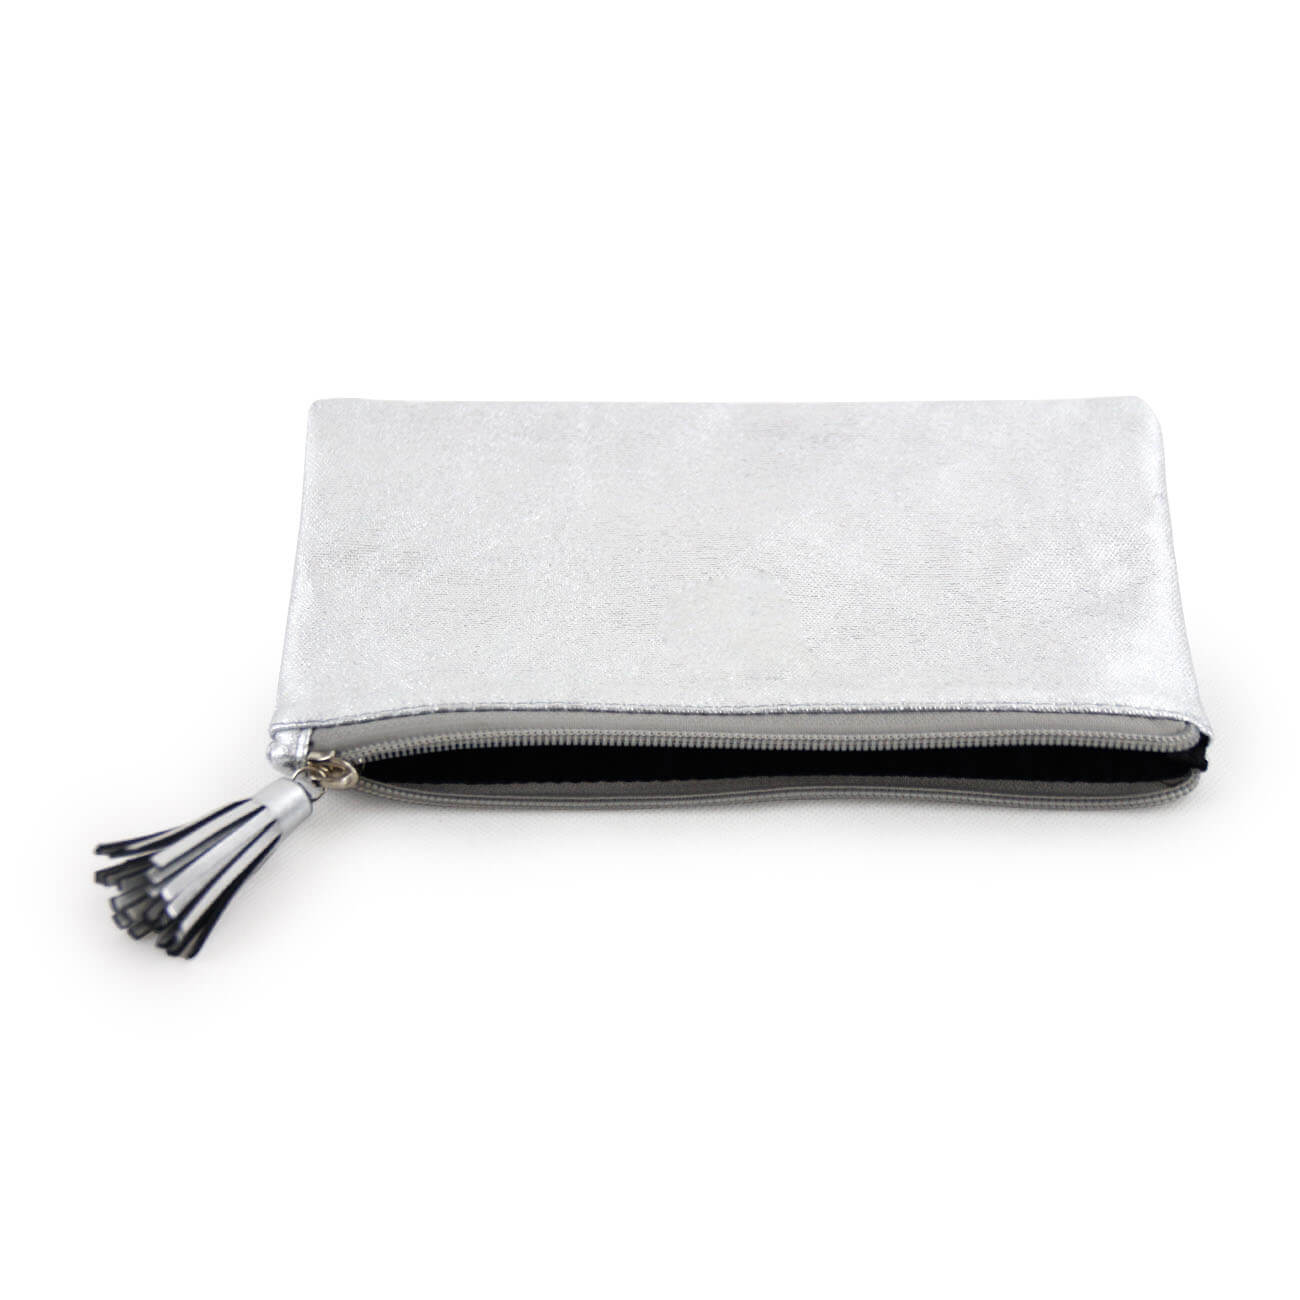 Laminated Silver Canvas Makeup Pouch